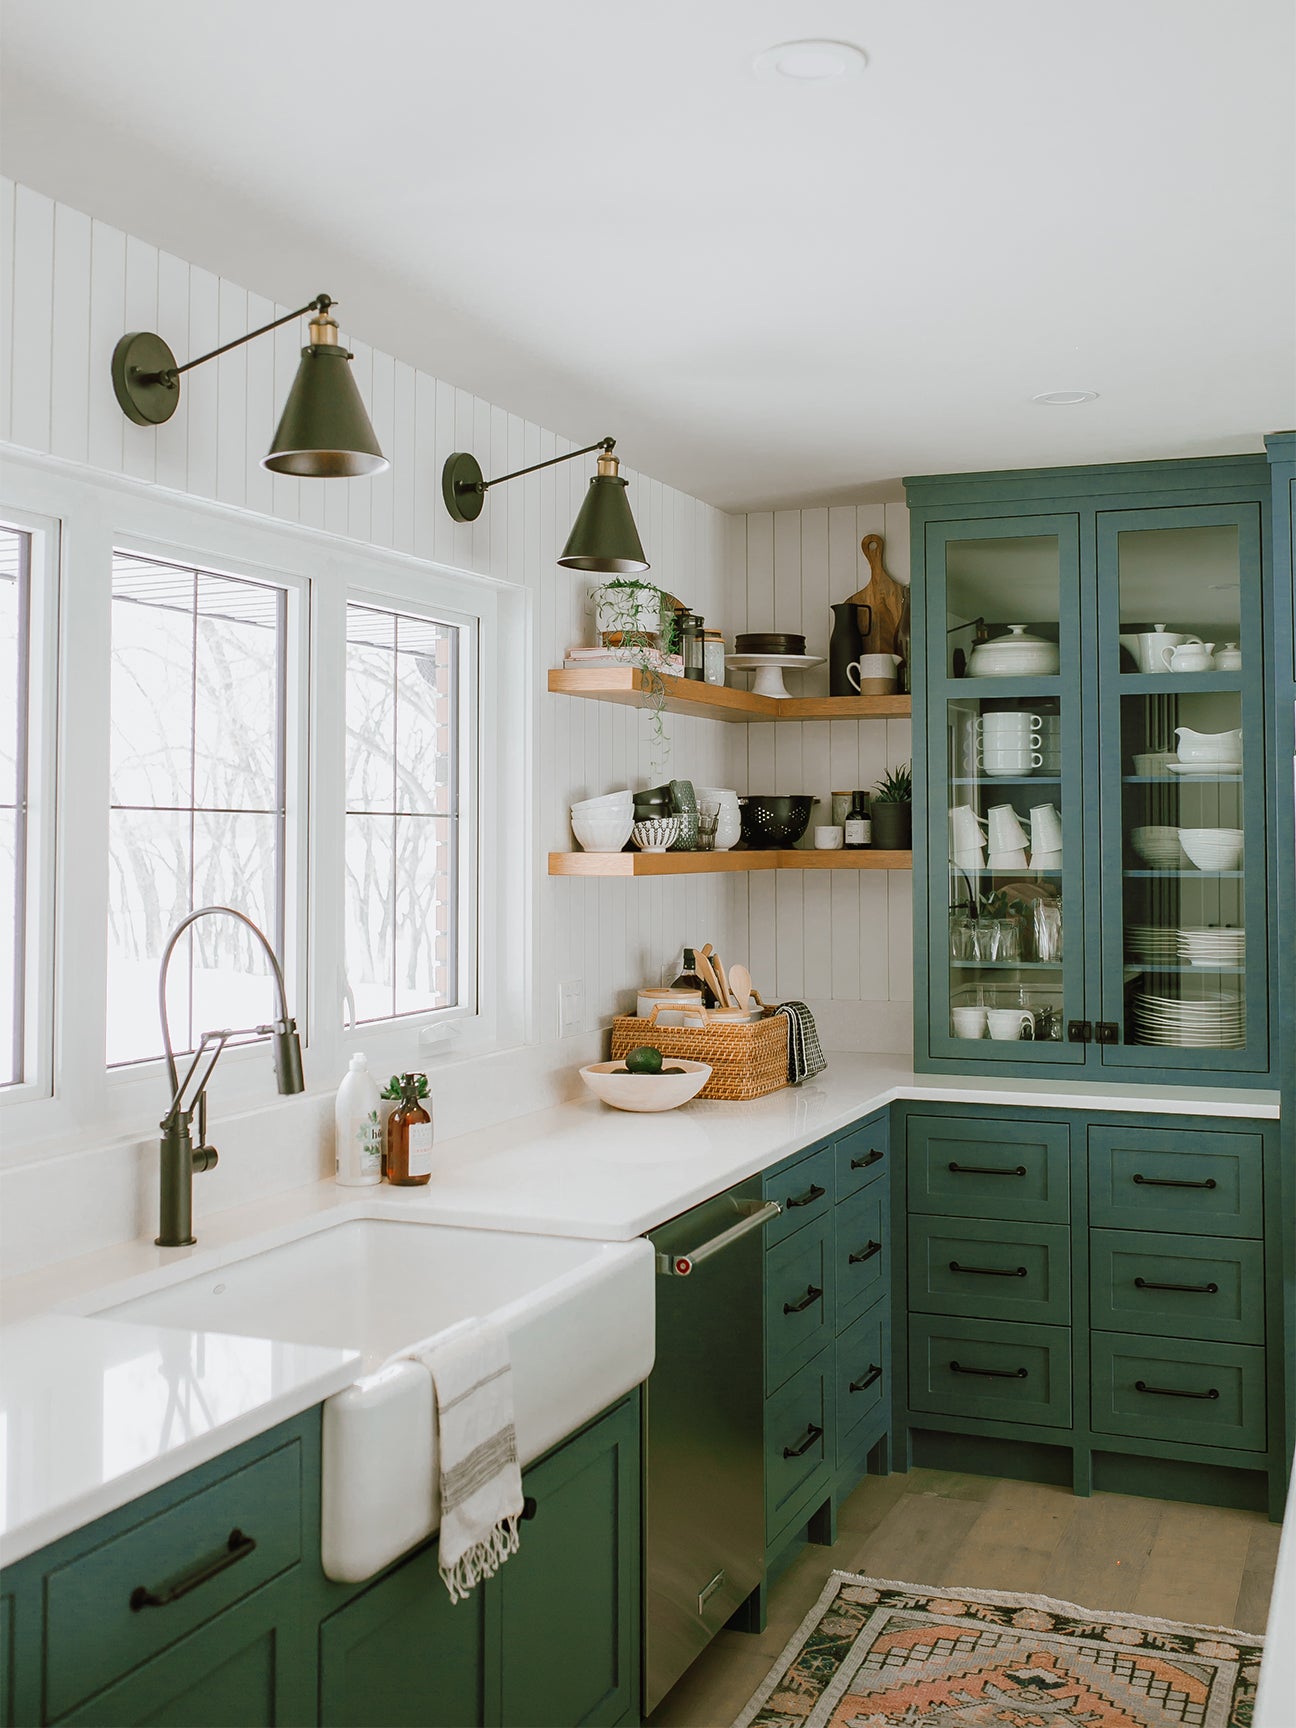 20 Green Kitchen Cabinet Ideas for Your Most Colorful Renovation Yet